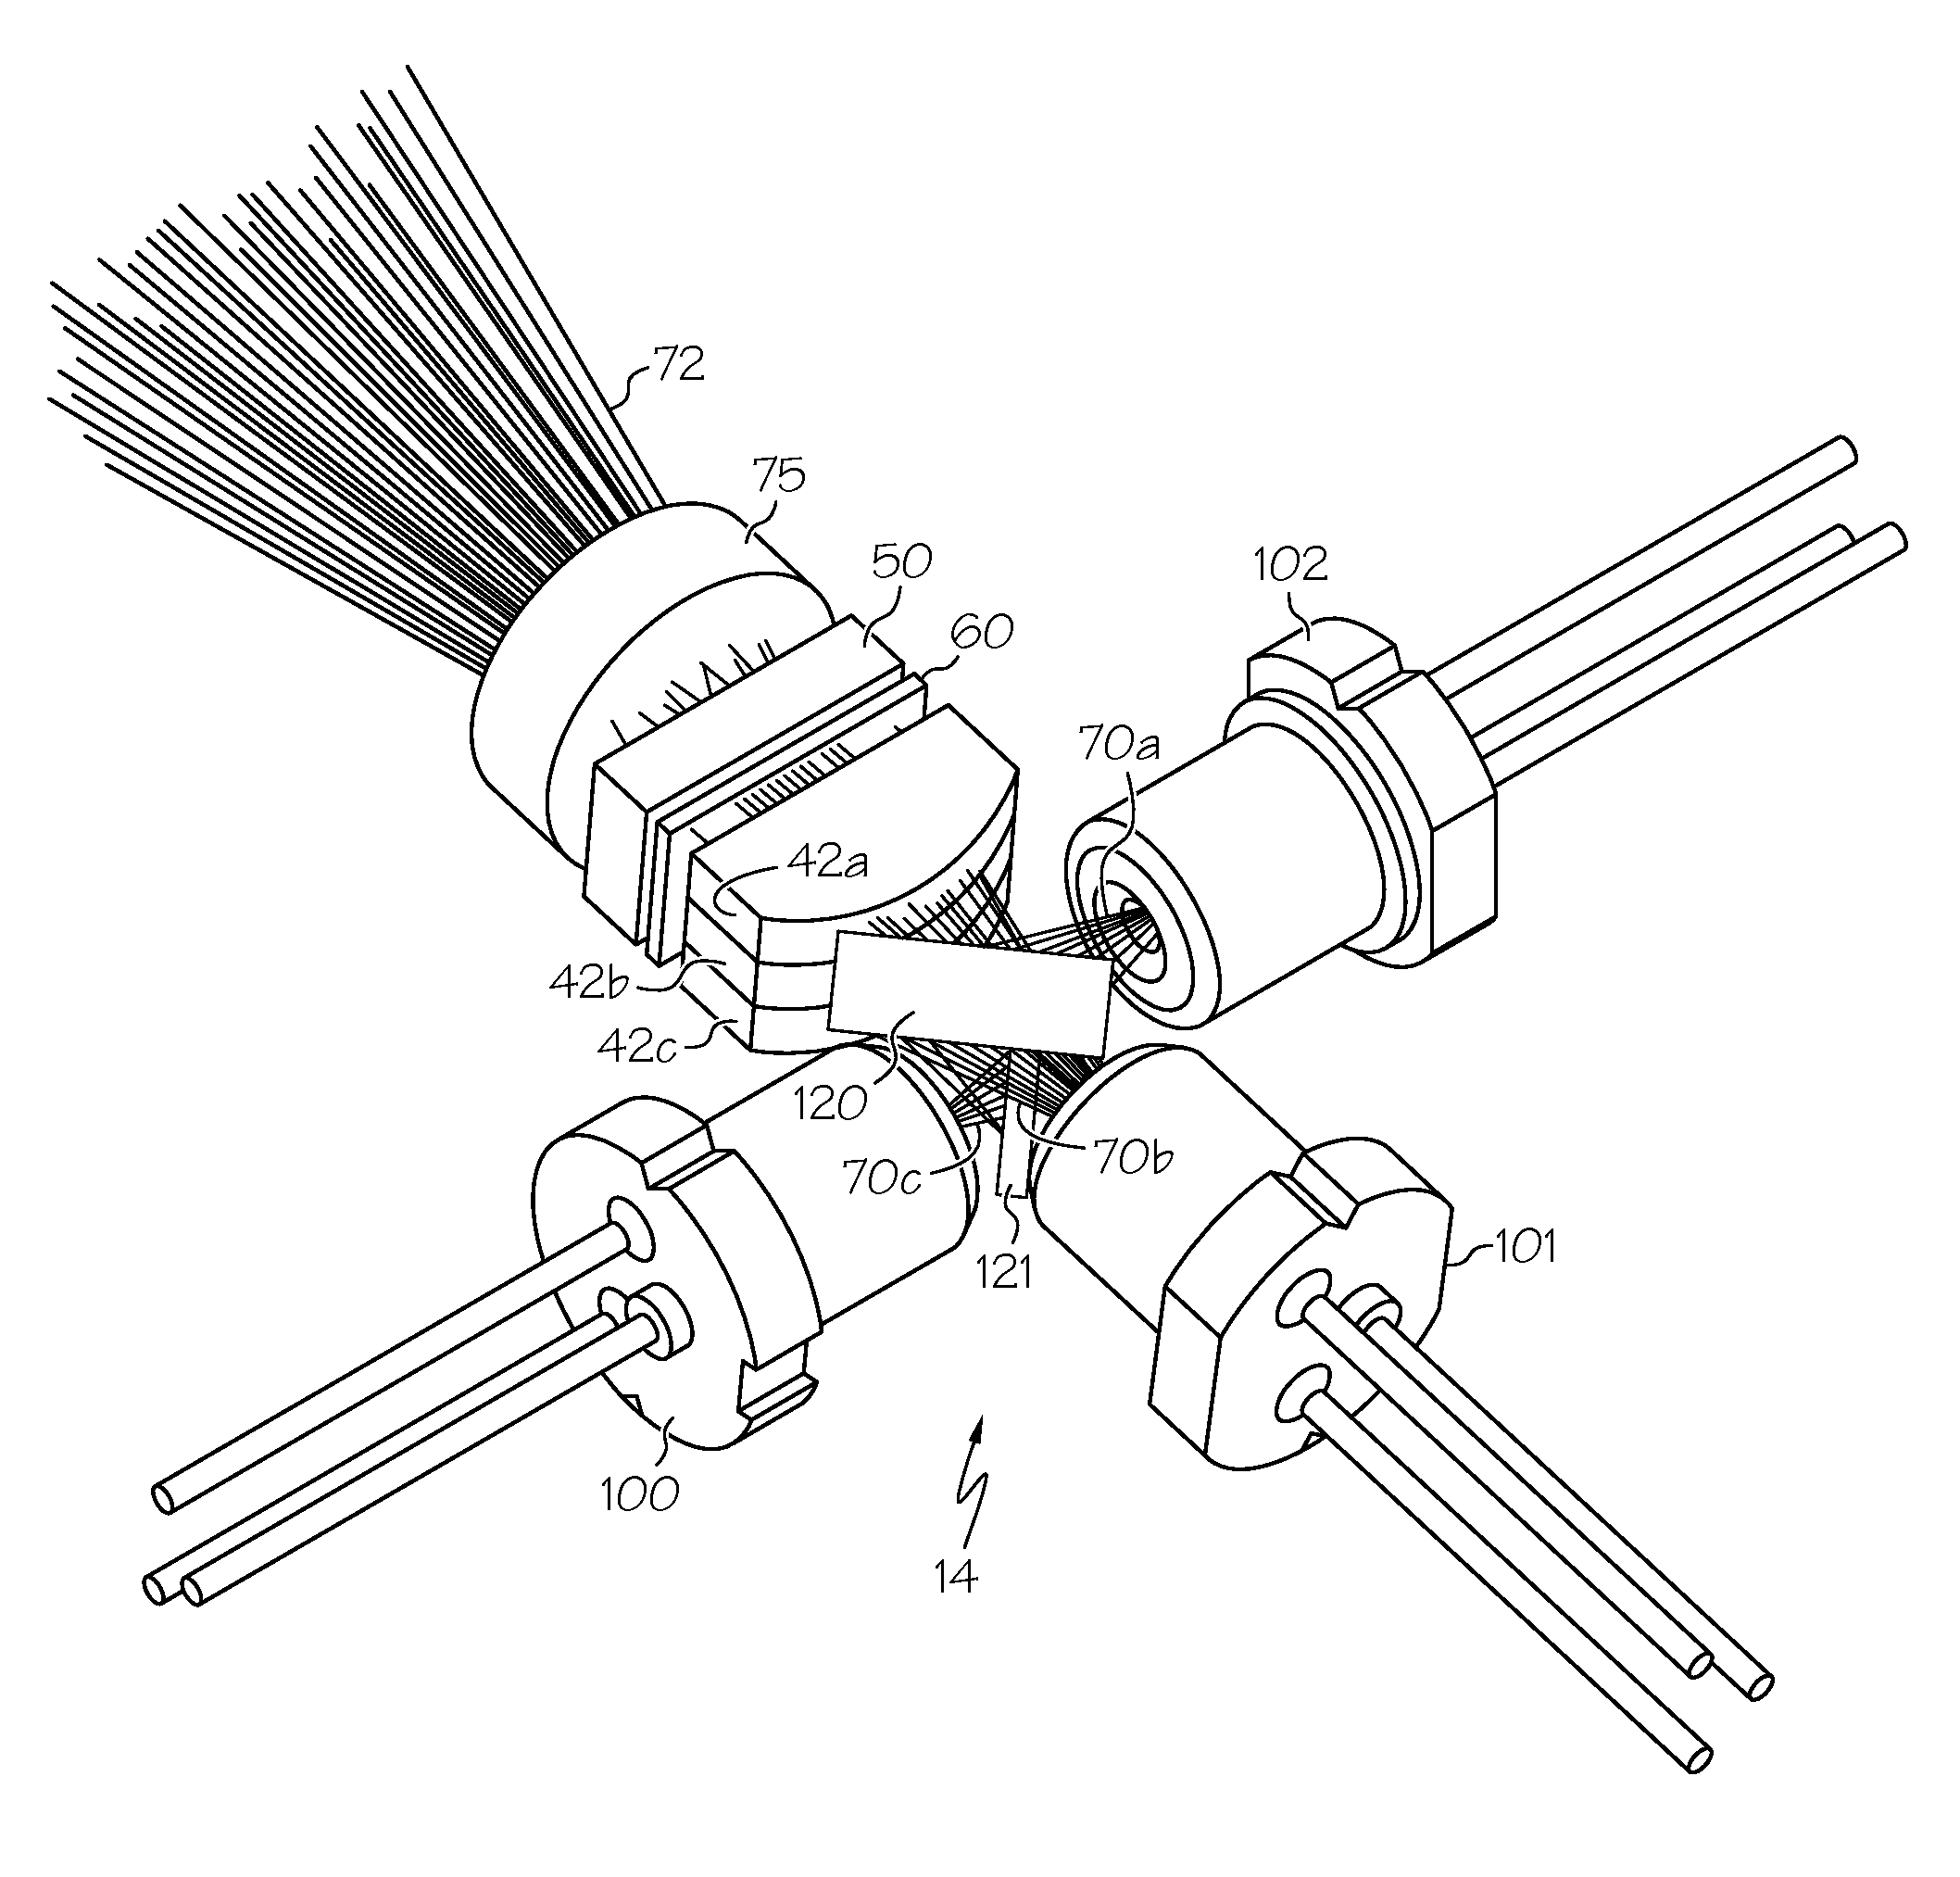 Projector with laser illumination elements offset along an offset axis